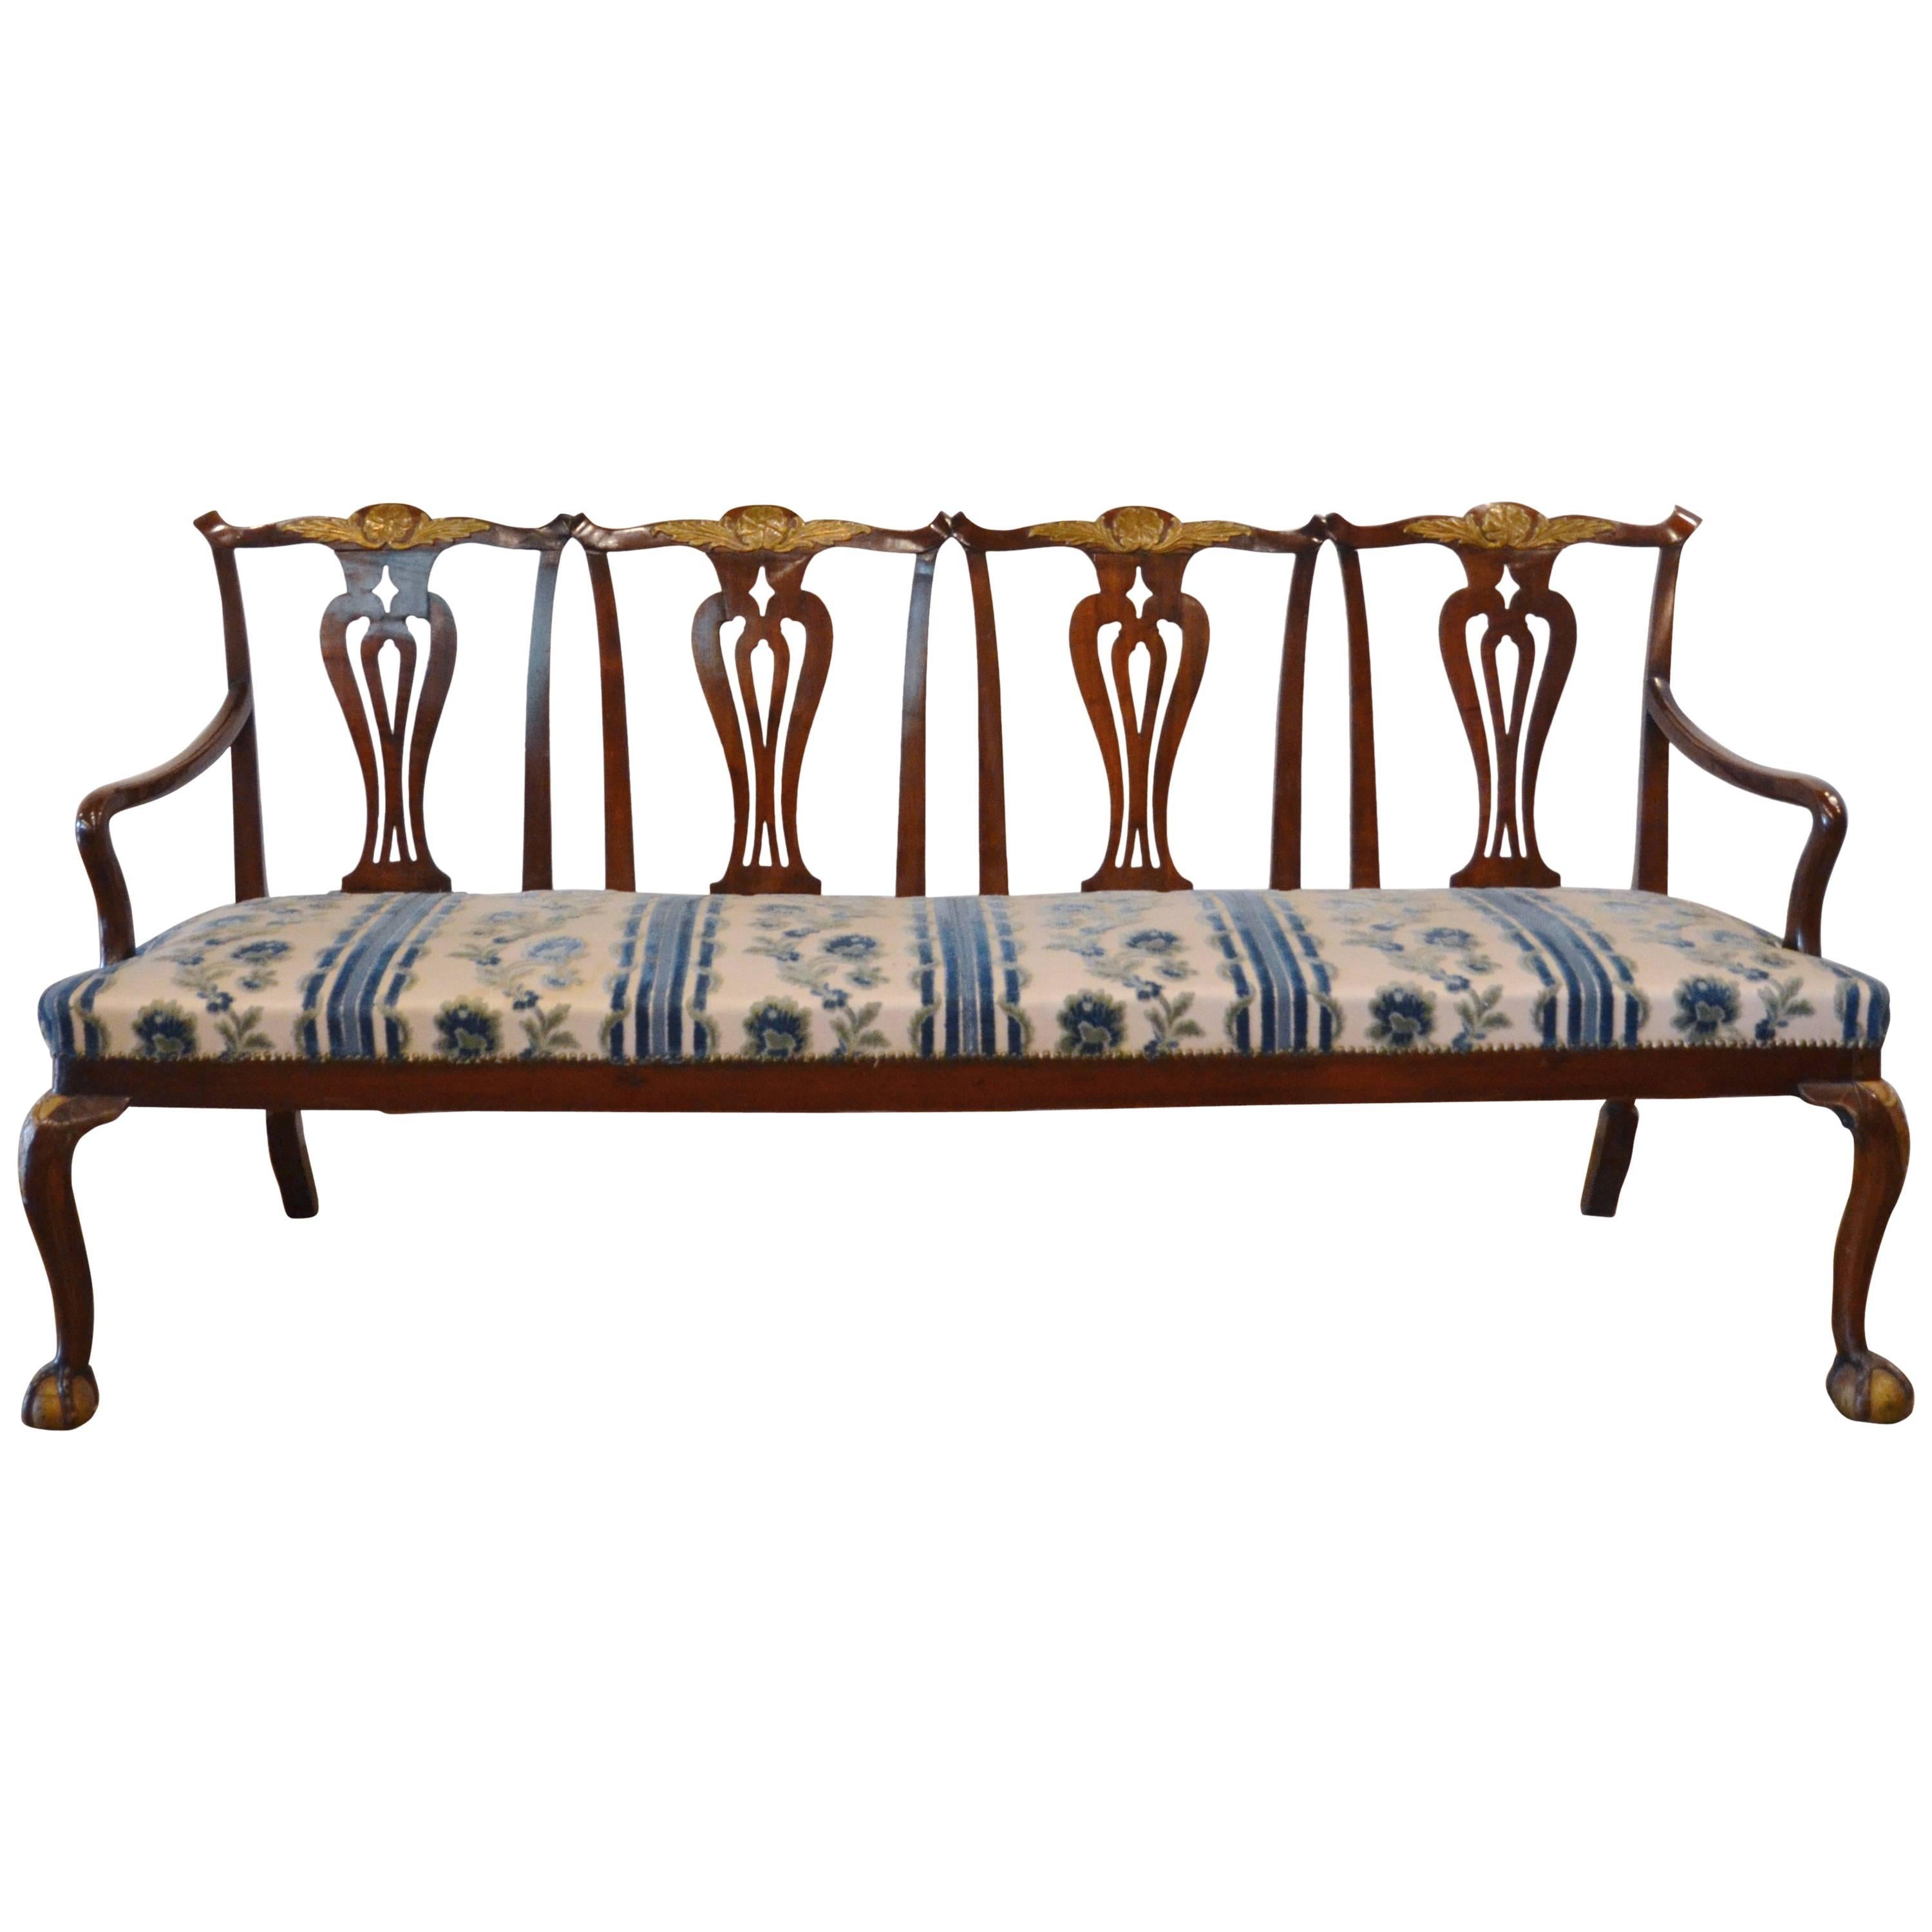 Chippendale Style Mahogany Four-Seat Back Settee